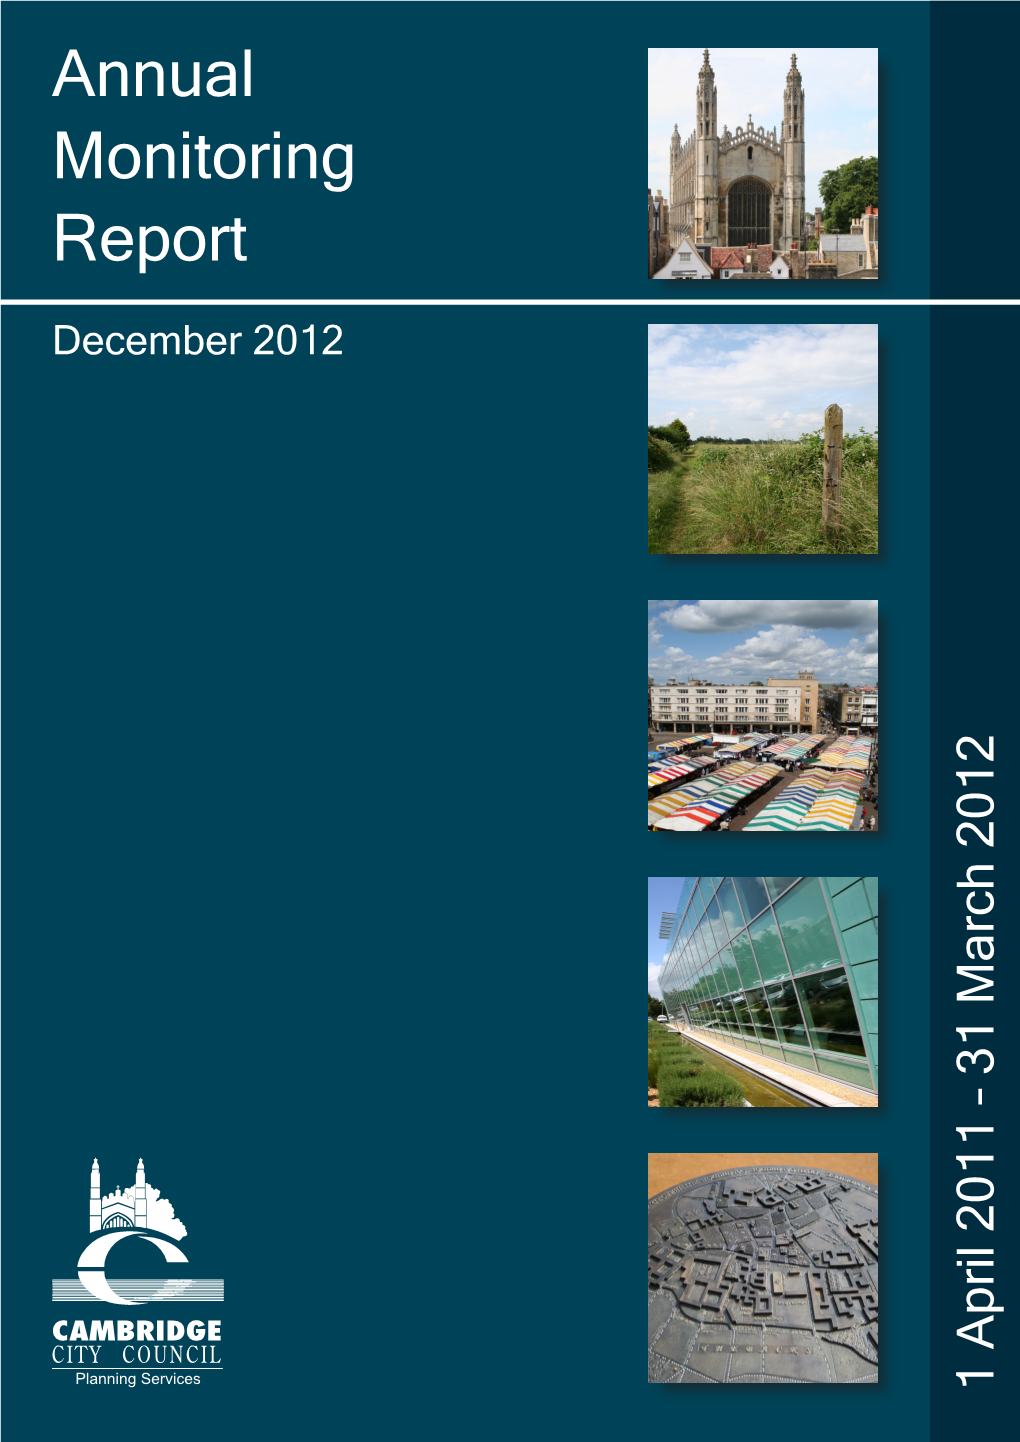 Annual Monitoring Report 2011-2012